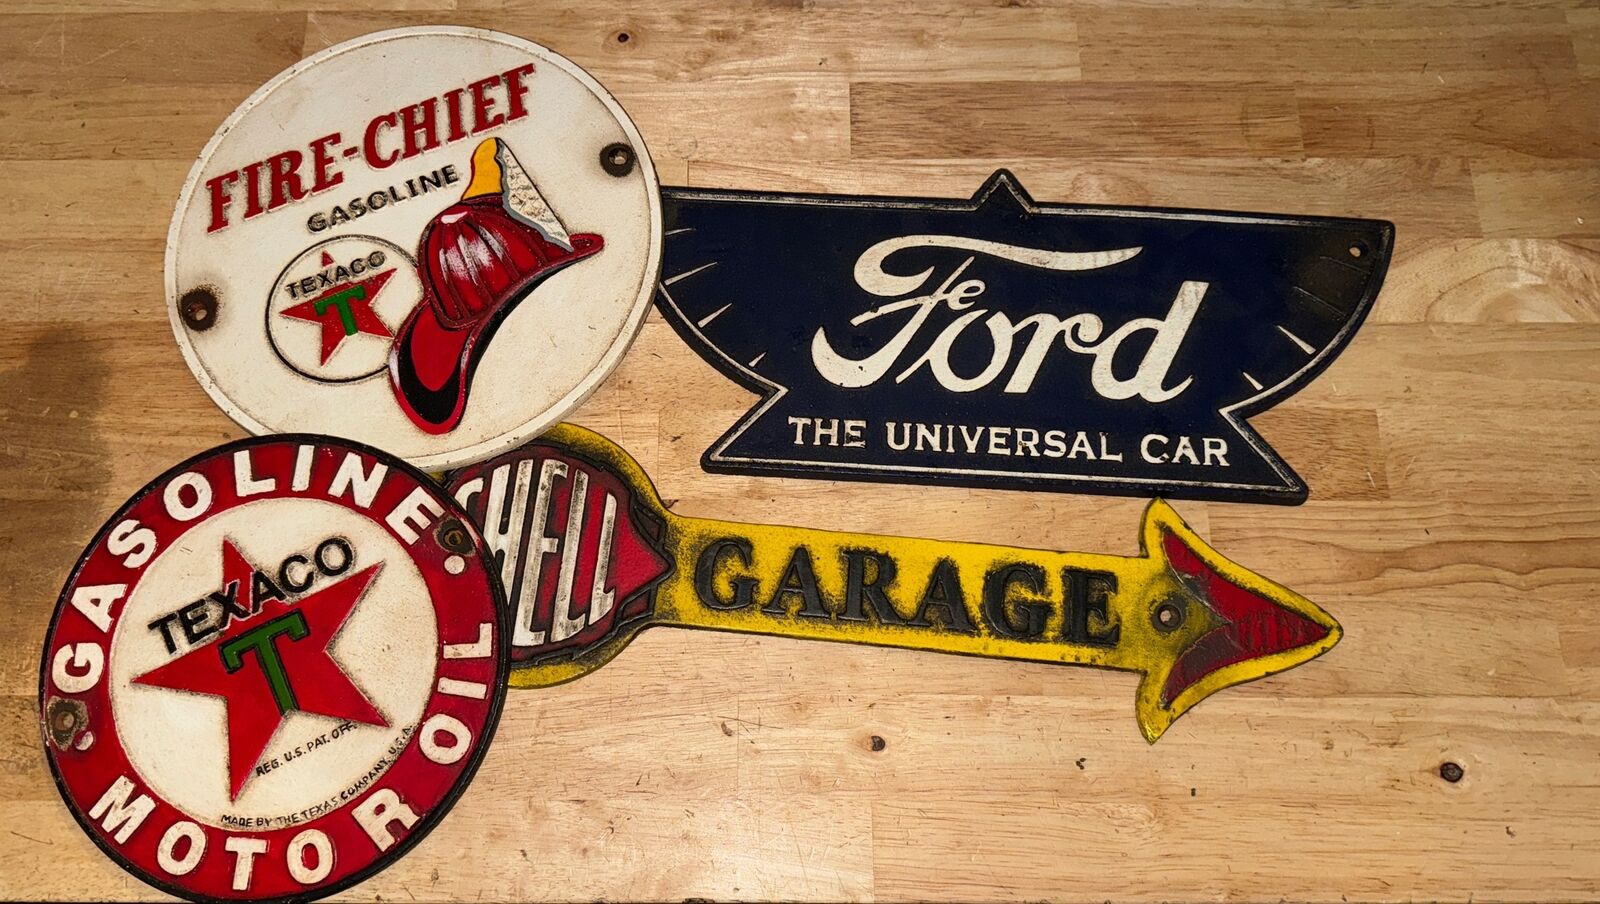 Ford Texaco Shell Oil Garage Cast Iron Sign Plaque Set Lot Patina Fire Collector